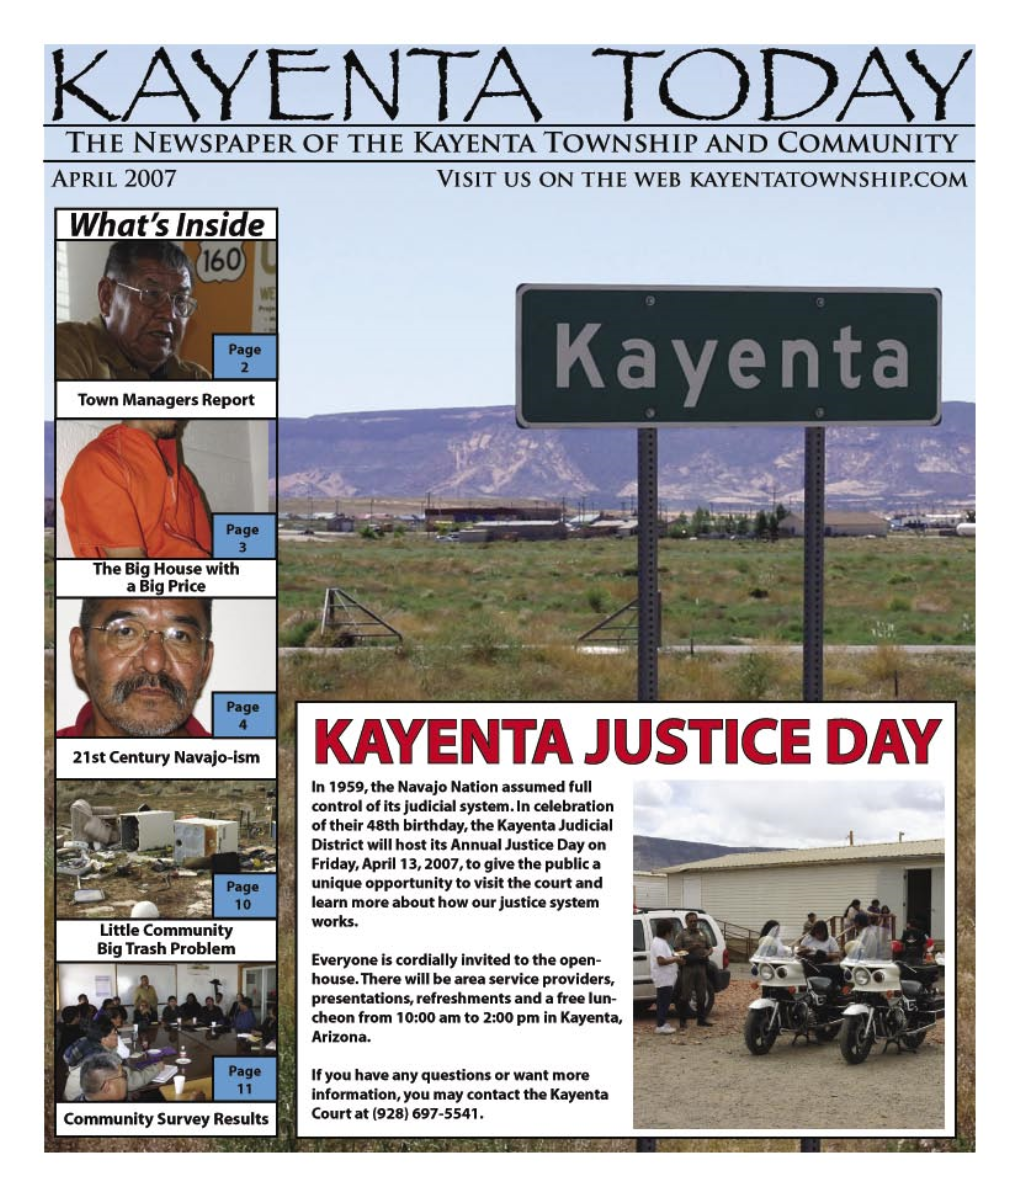 April, 28 at the Kayenta Enough to Fund the Need for Public Town Hall